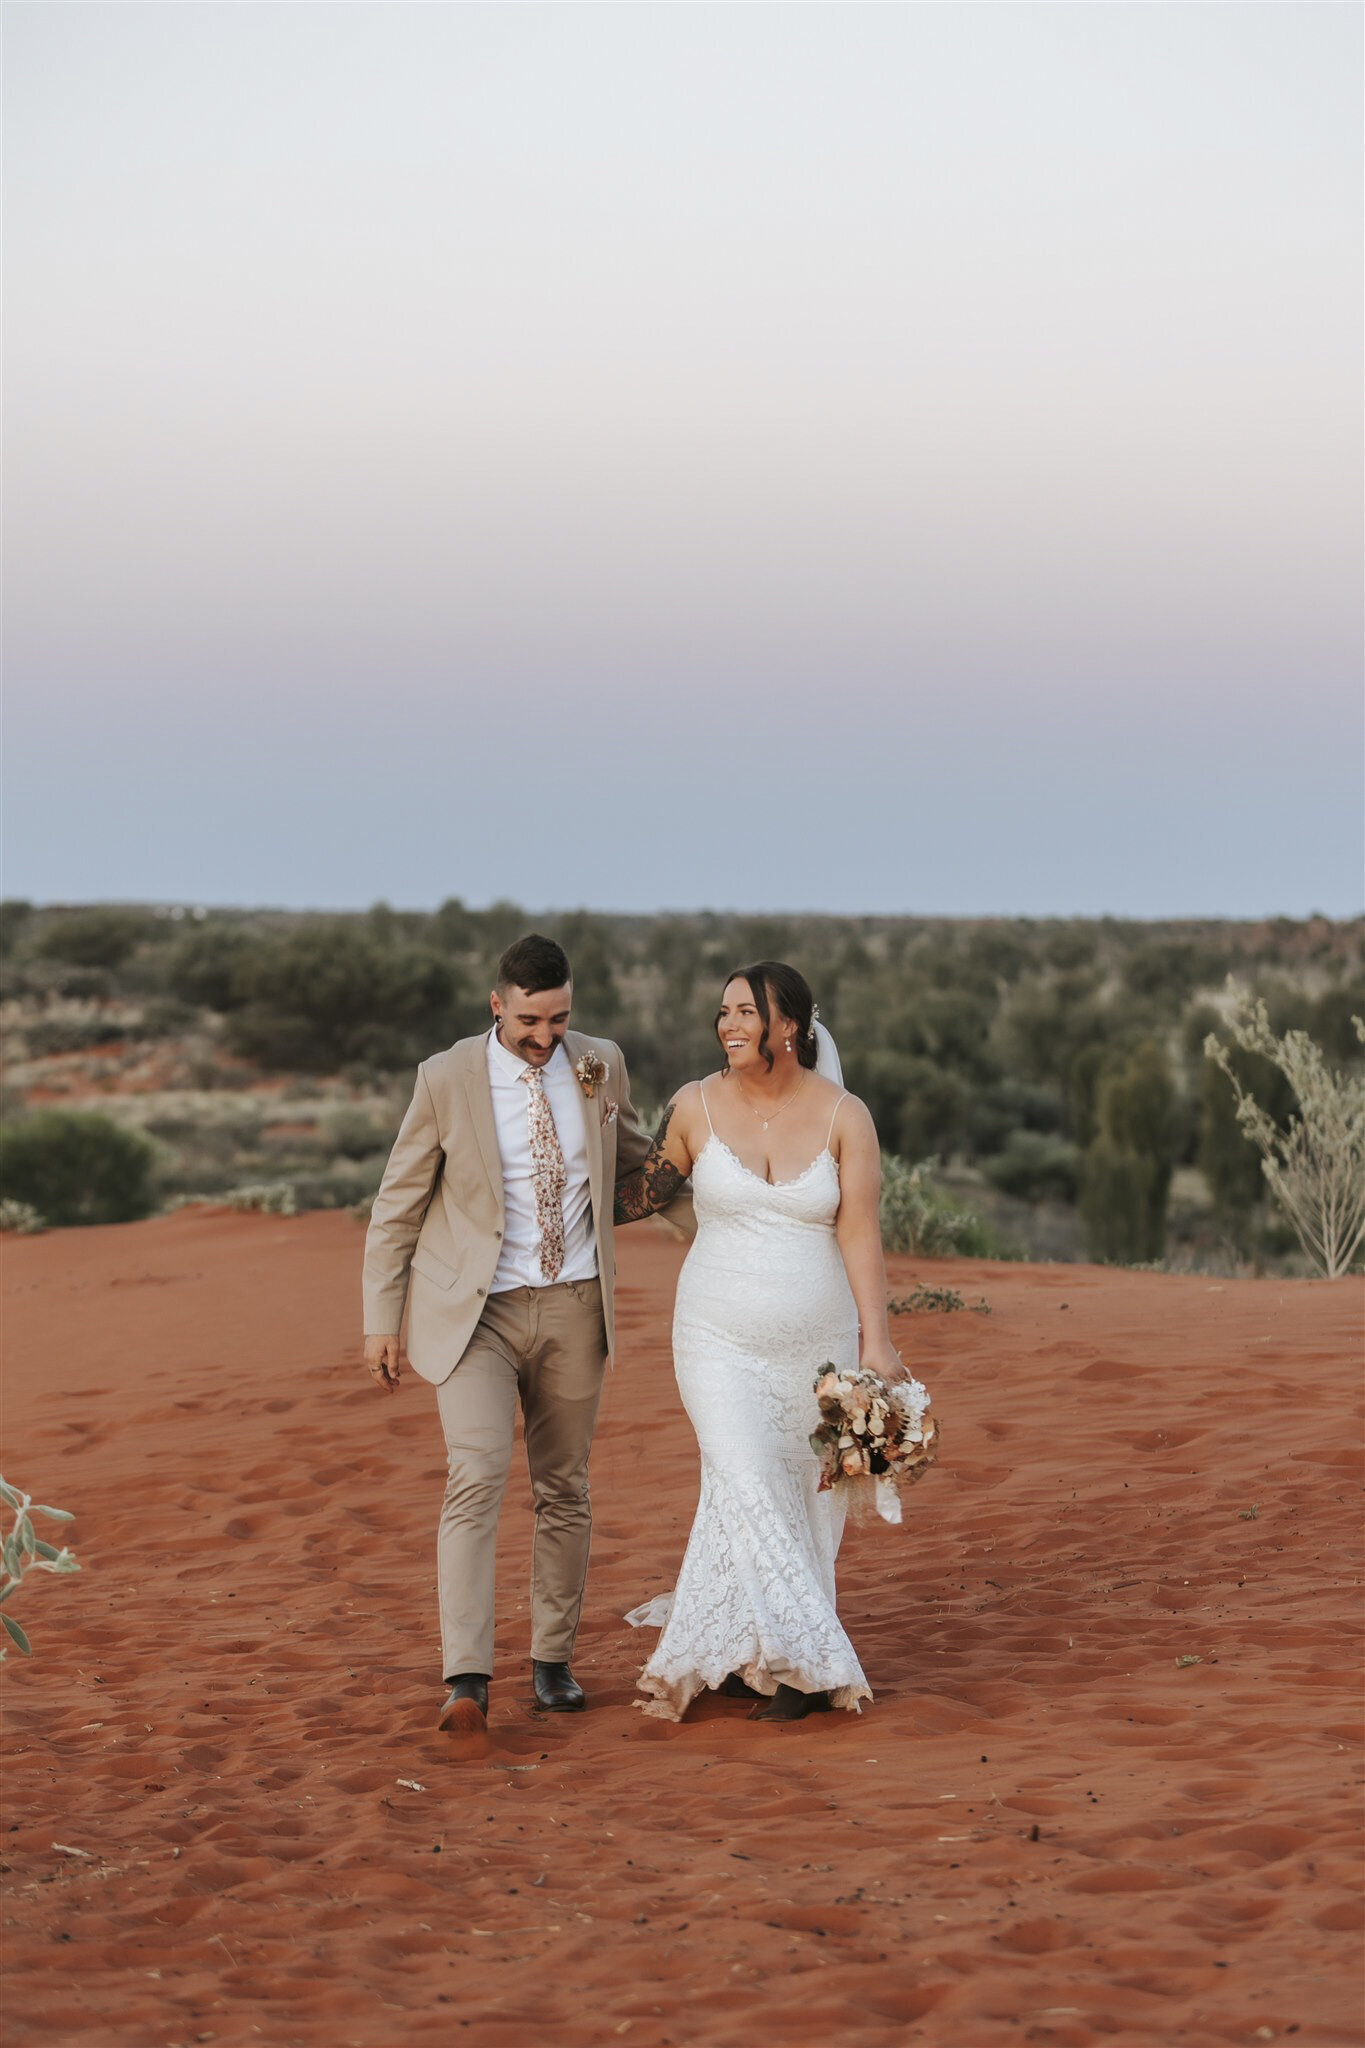 Uluru wedding showing a woman in a wedding dress and a man with a beige suit in the desert